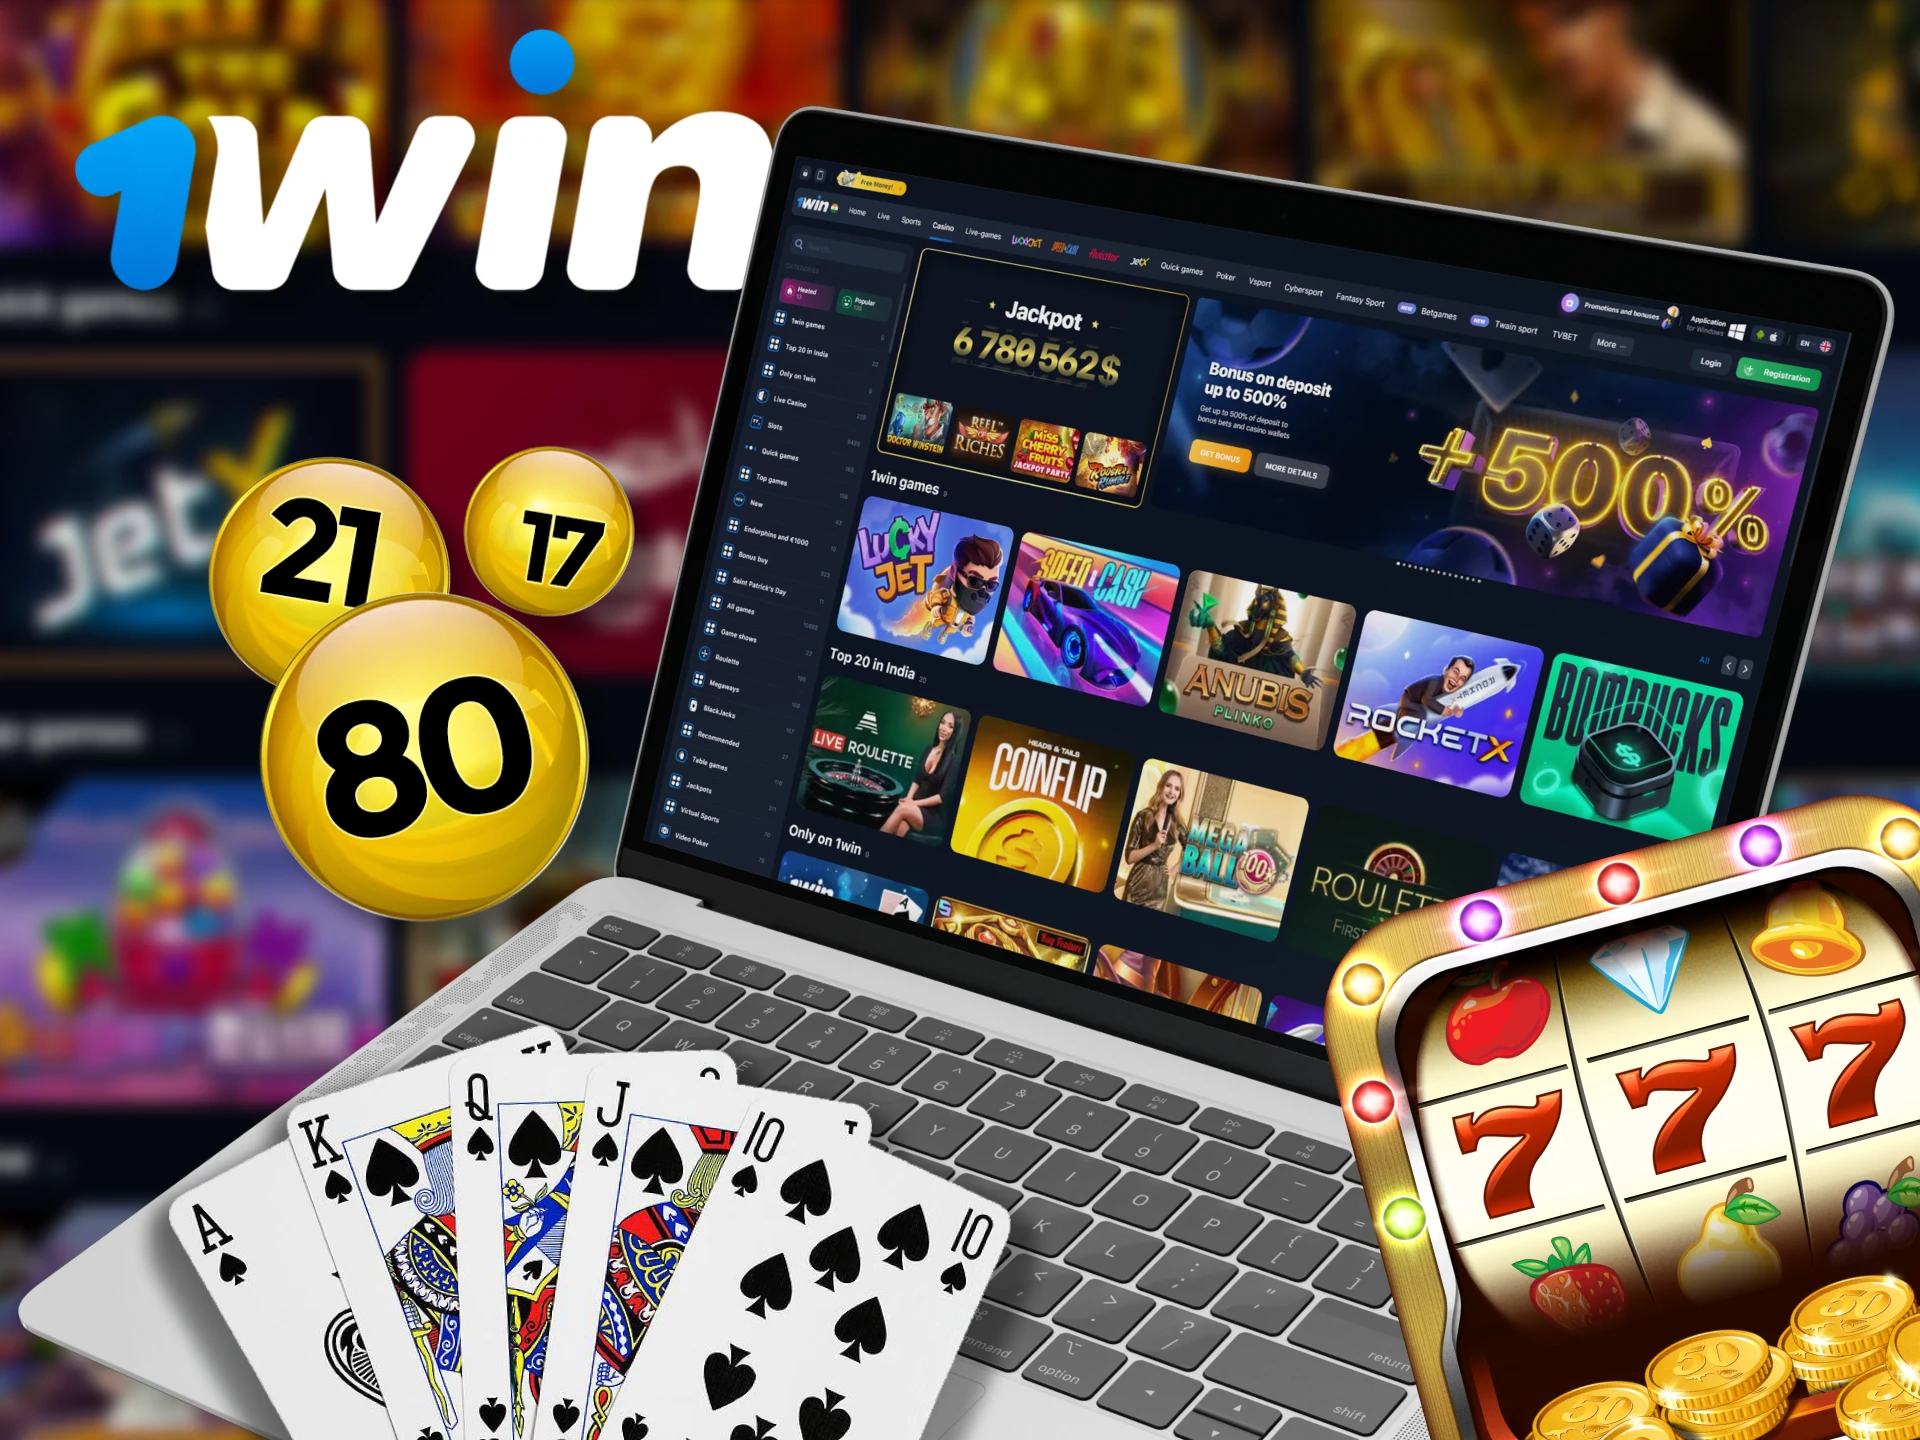 1win online casino and betting site in India